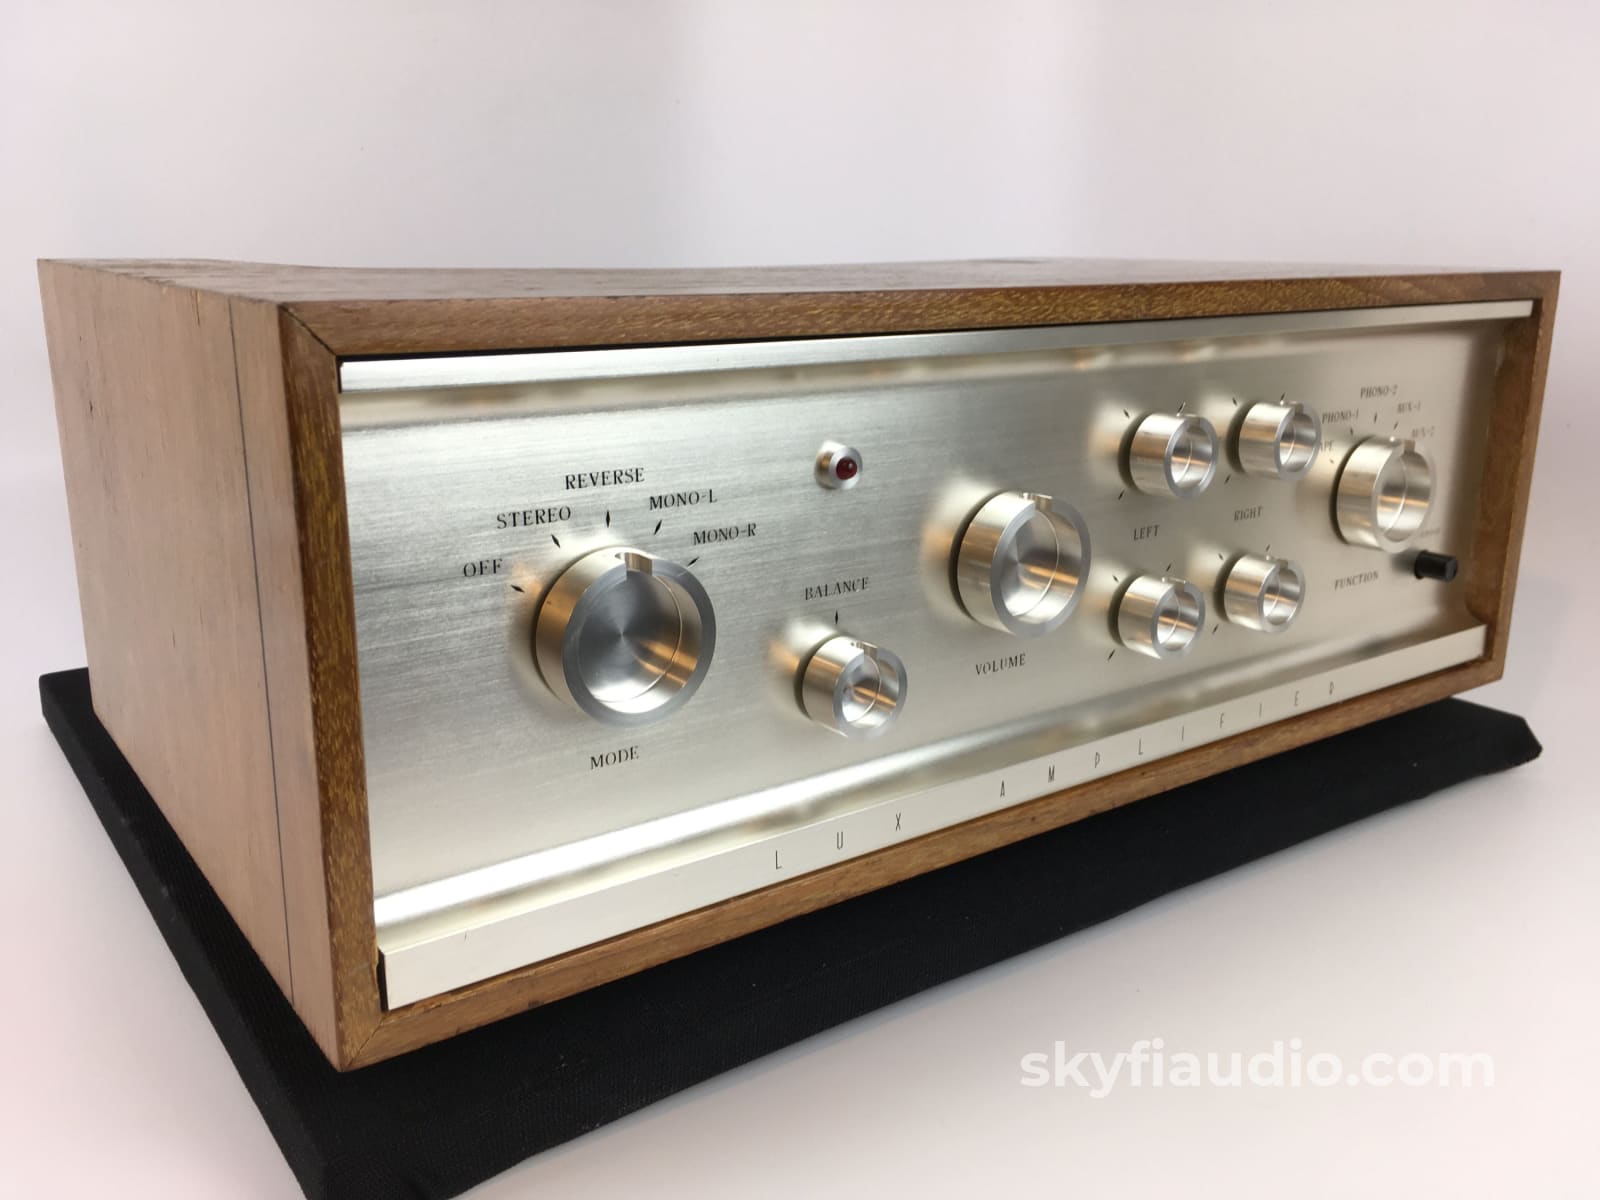 Luxman Sq-38D Tube Integrated Amplifier